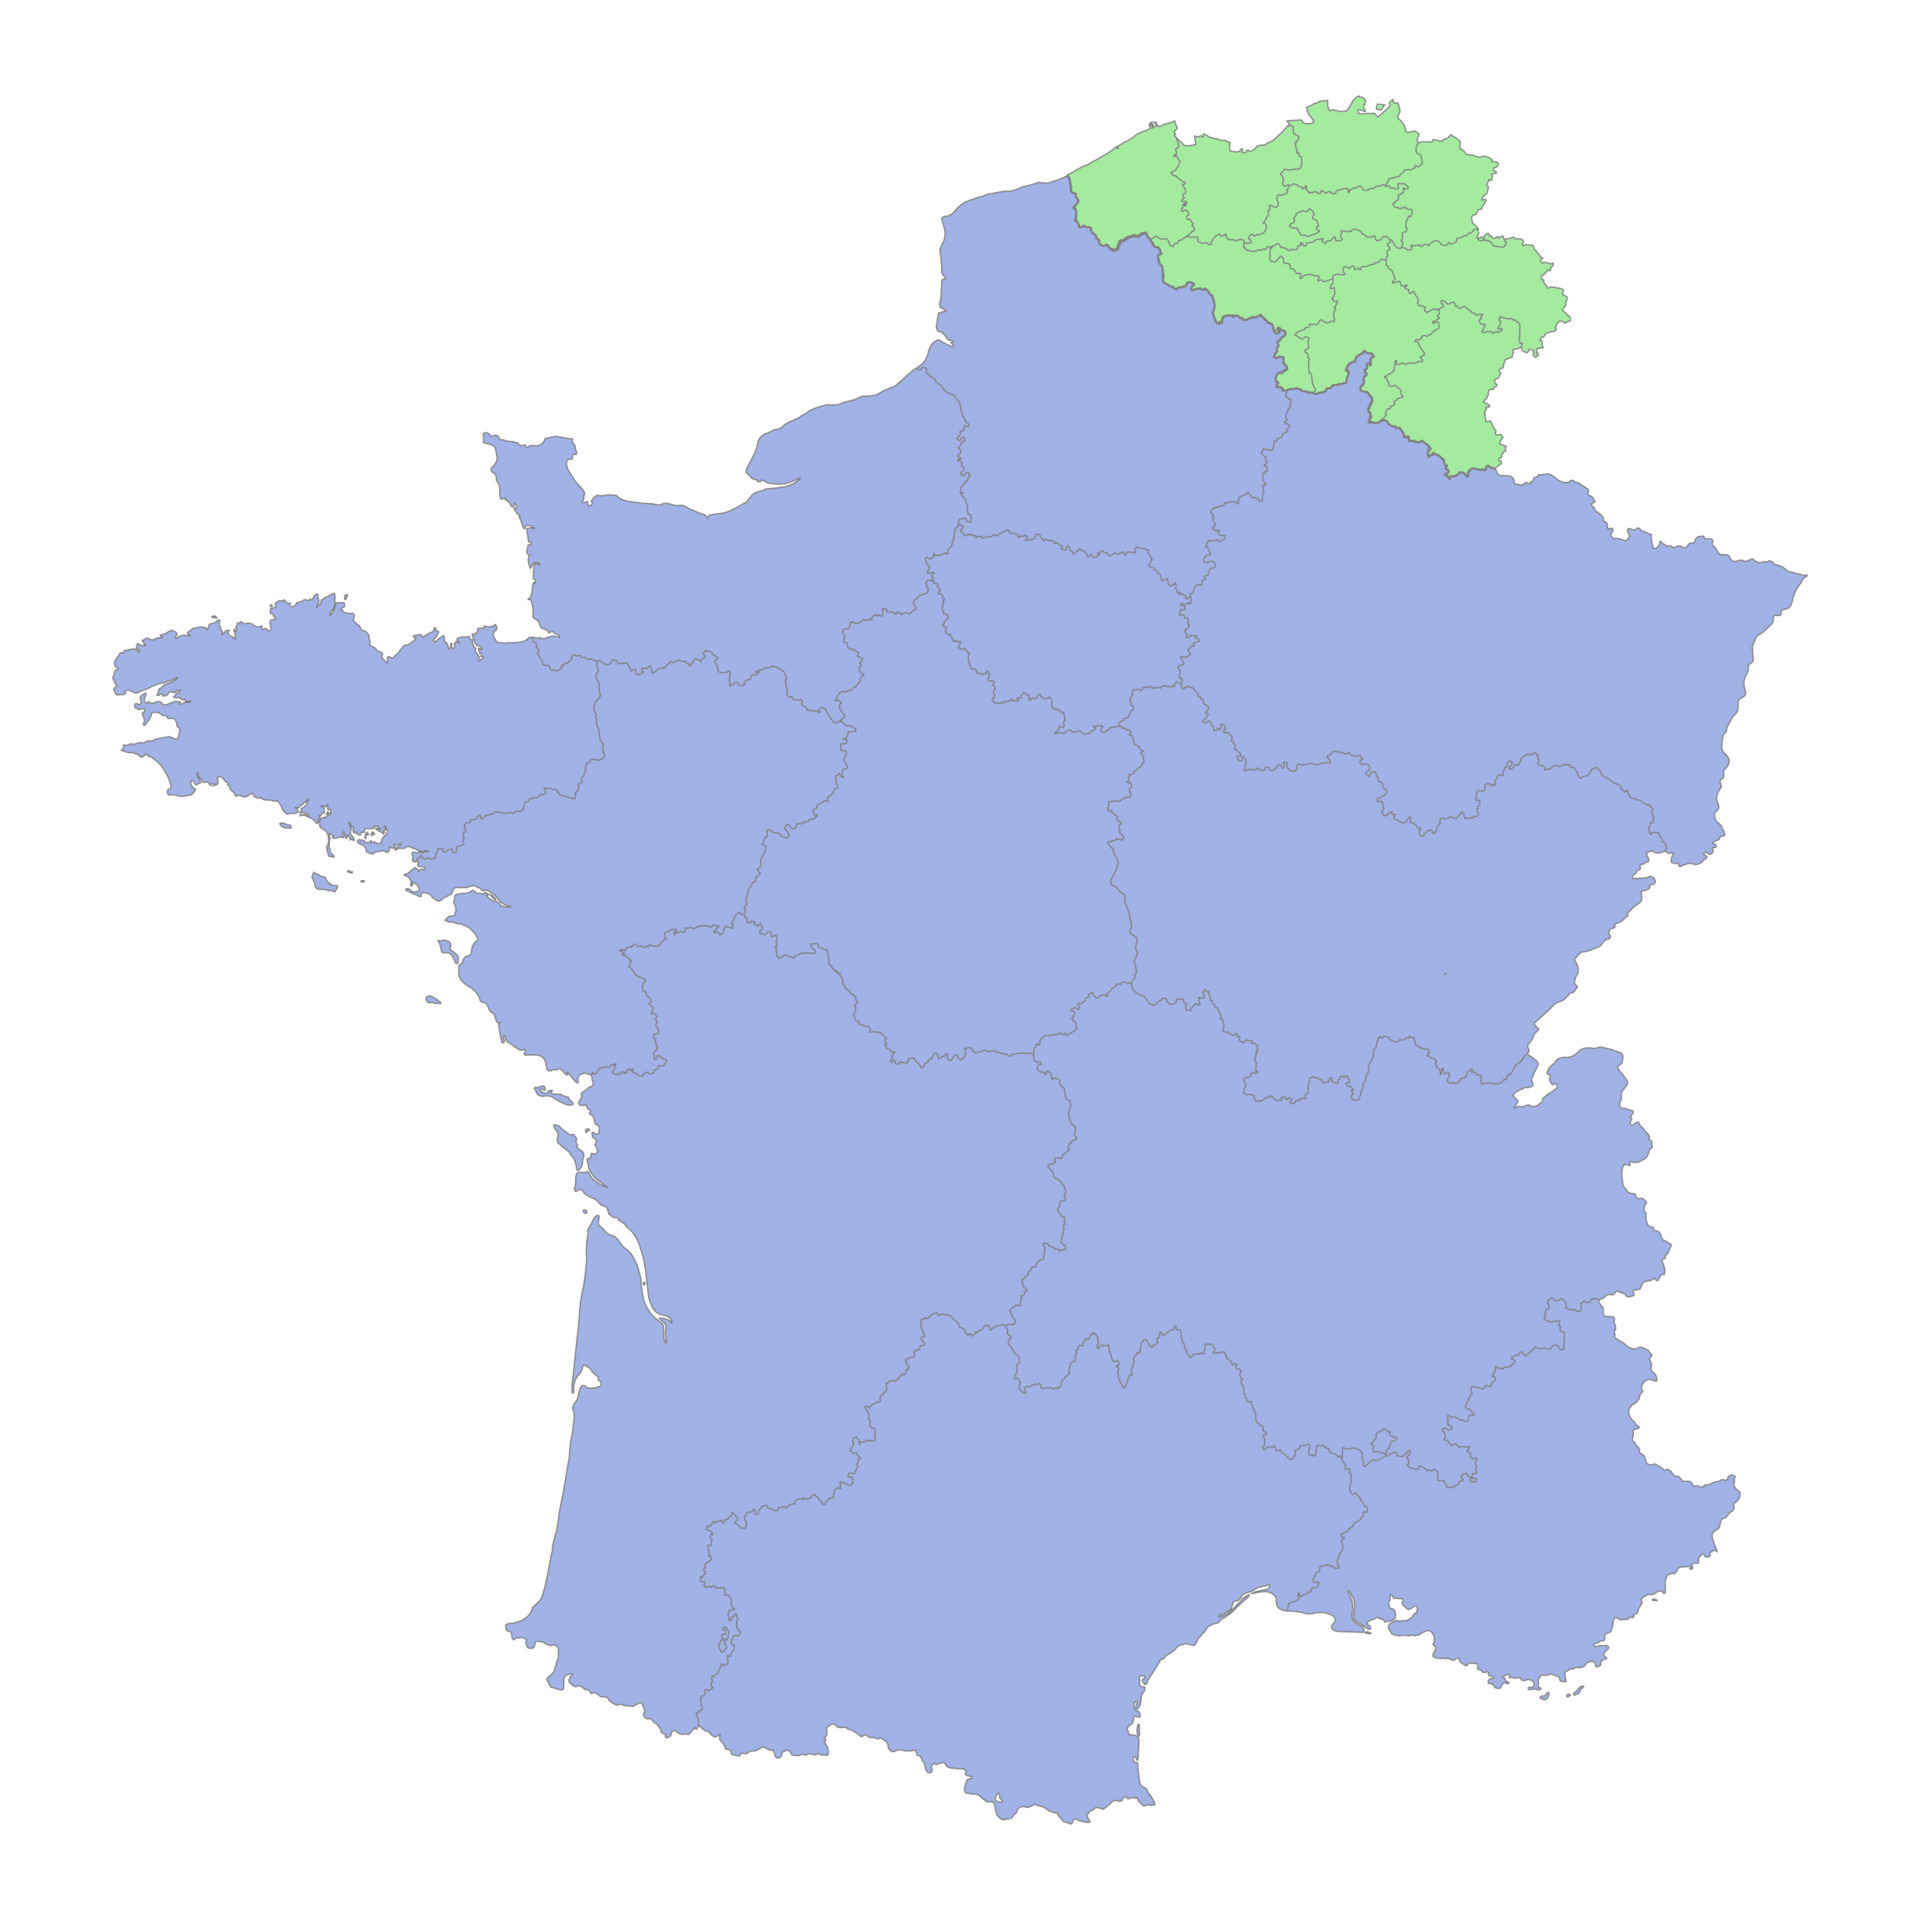 High quality political map of France and Belgium with borders of ...